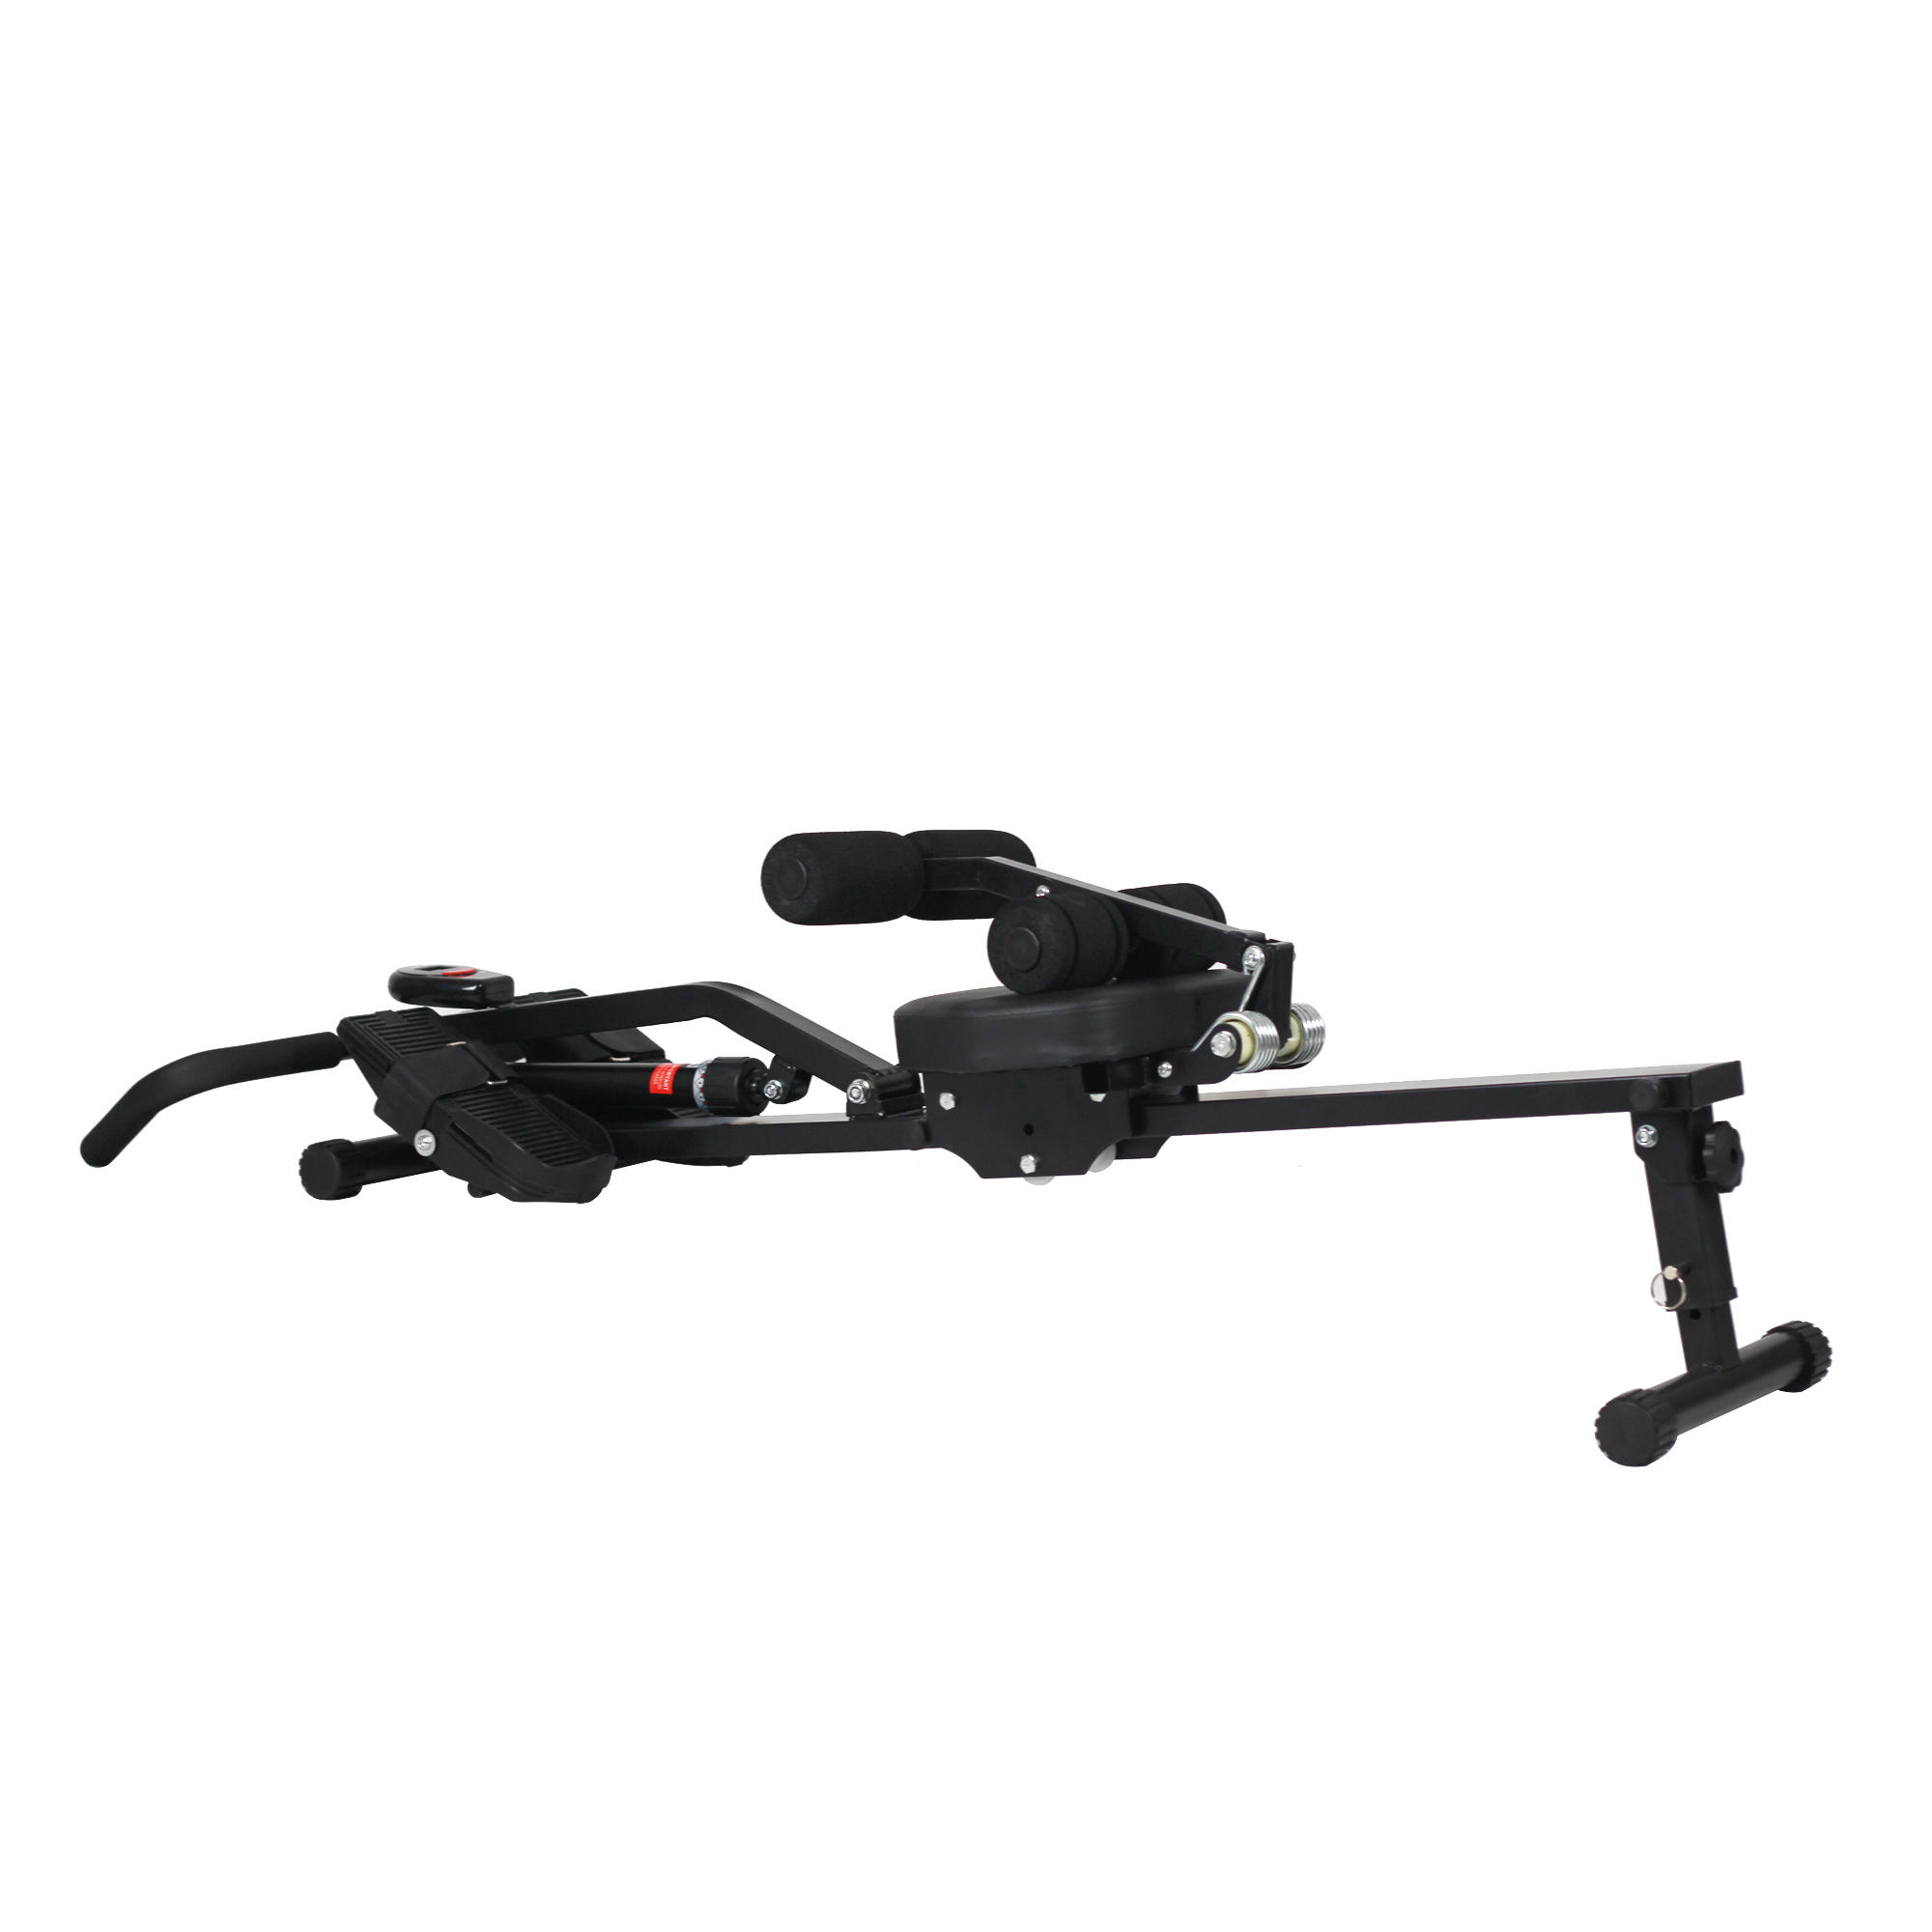 HY-P8012S home use double handle rowing machine